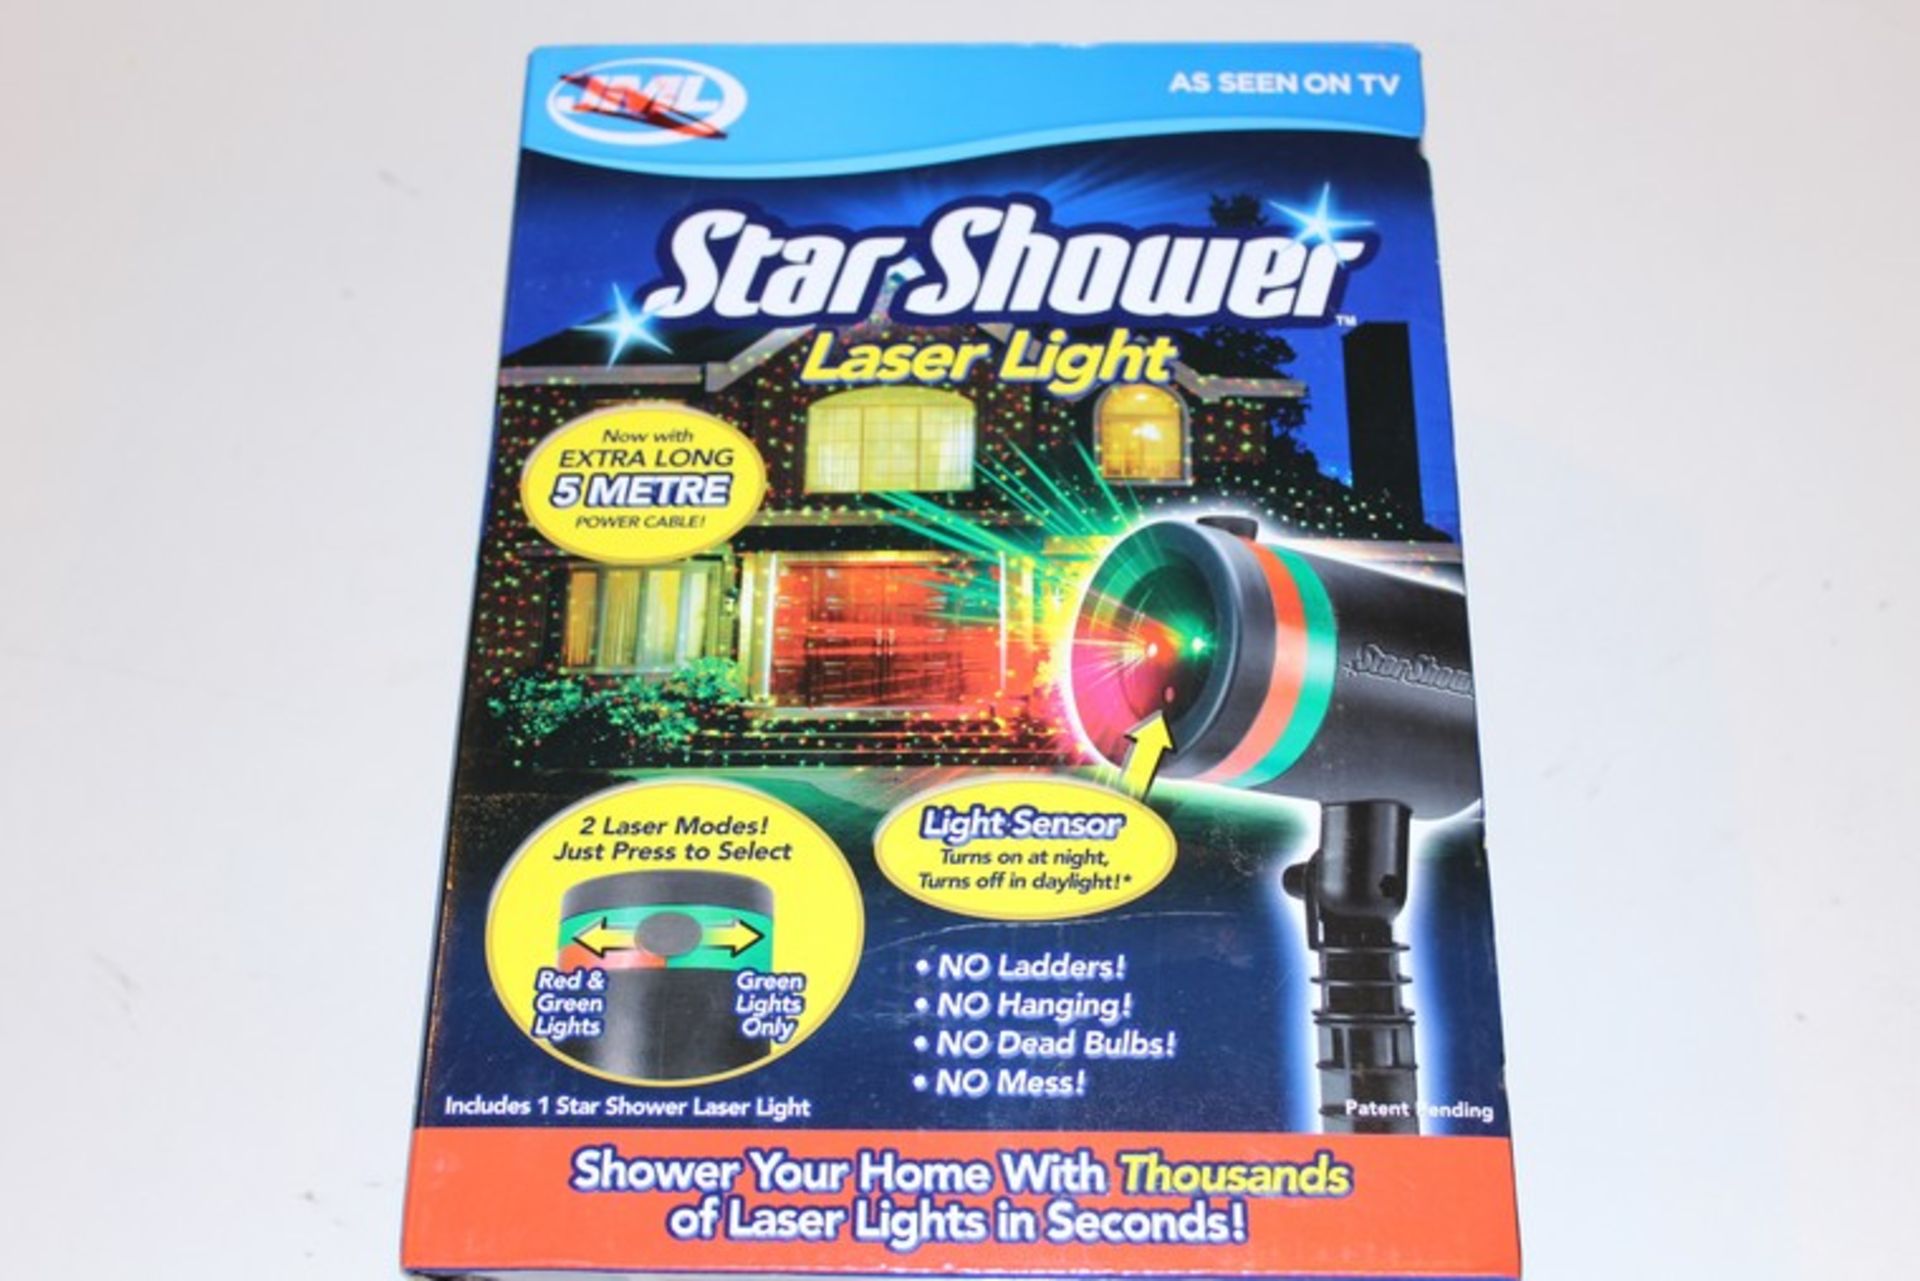 2 x BOXED STAR SHOWER LASER LIGHTS (18.10.17) *PLEASE NOTE THAT THE BID PRICE IS MULTIPLIED BY THE